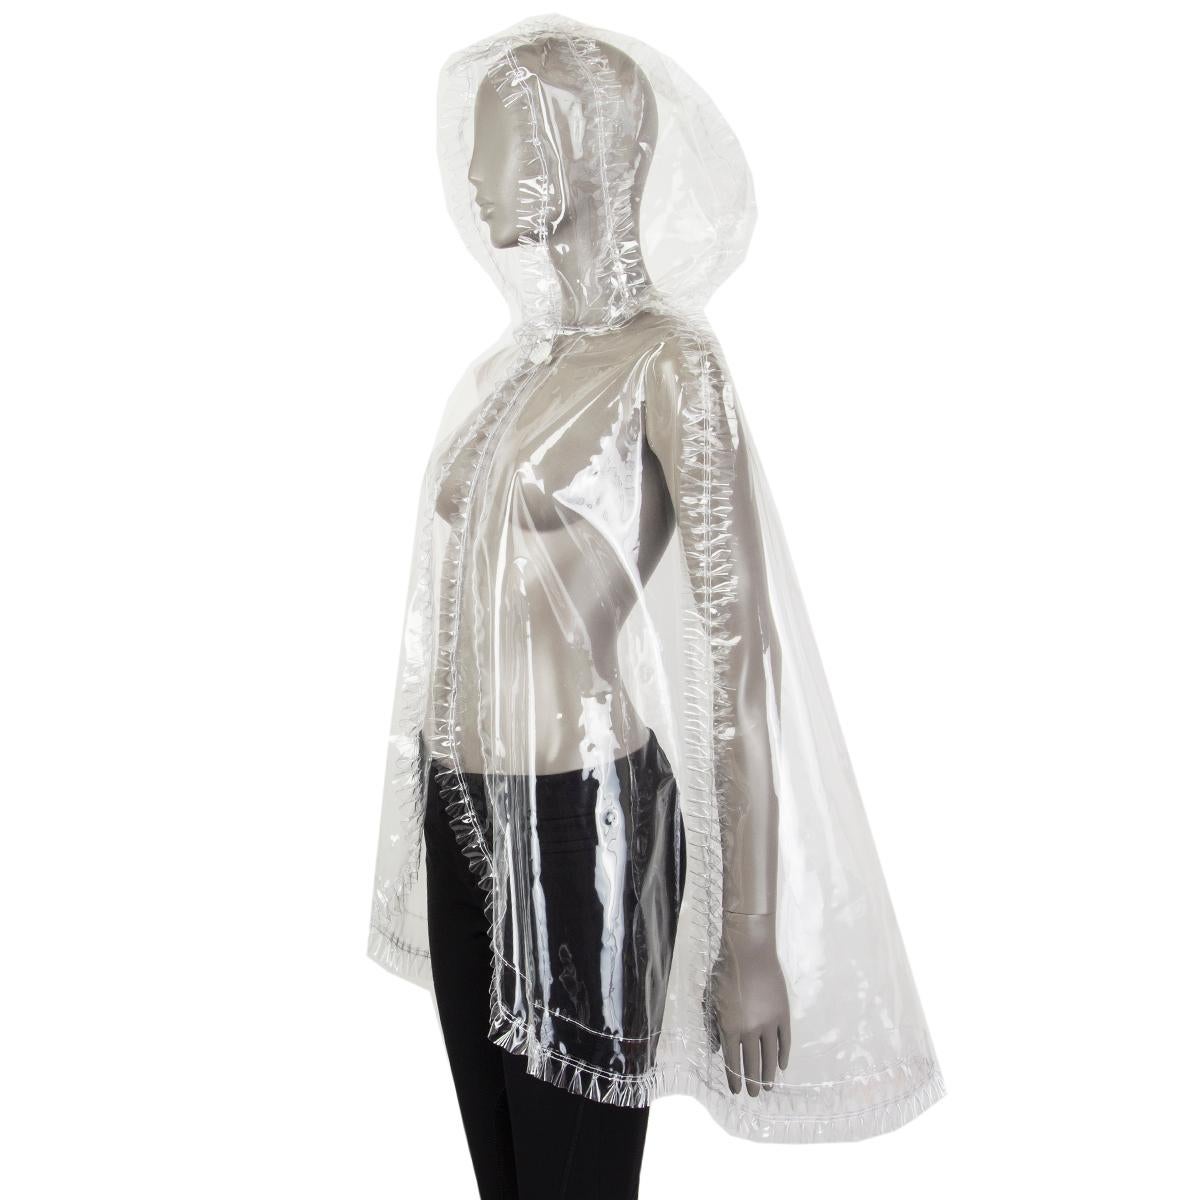 Chanel runway PCV rain cape in clear polyrethan (100%) with ruched trim and a hoddy from spring 2018 collection. Closes with a air bubble filled clear button and a CC logo in the front. Has been worn and is in excellent condition.

Tag Size M
Size